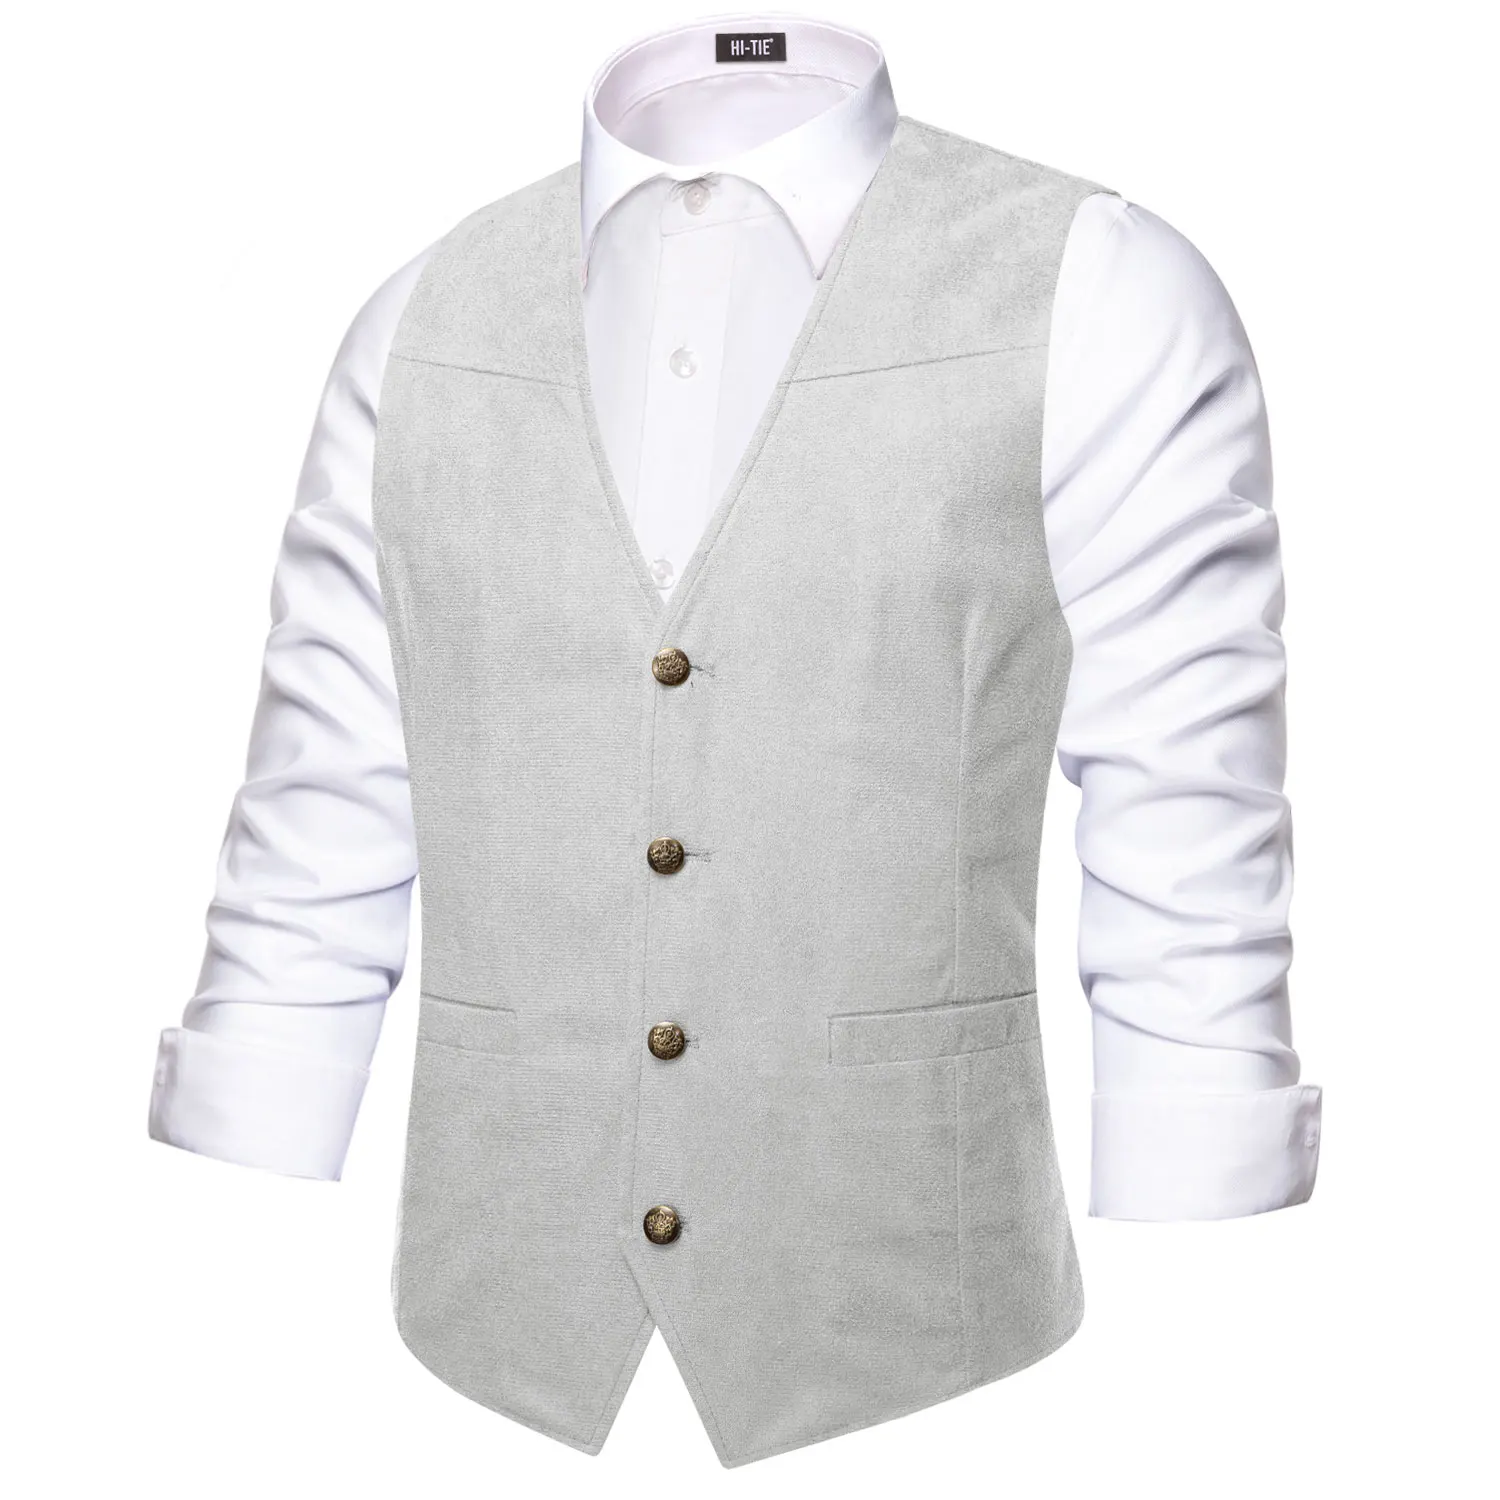 

Designer Mens Vests Silvery Suede Fabric High Quality Sleeveless Waistcoat Casual Fit Wedding Business Formal Party Gifts Hi-Tie